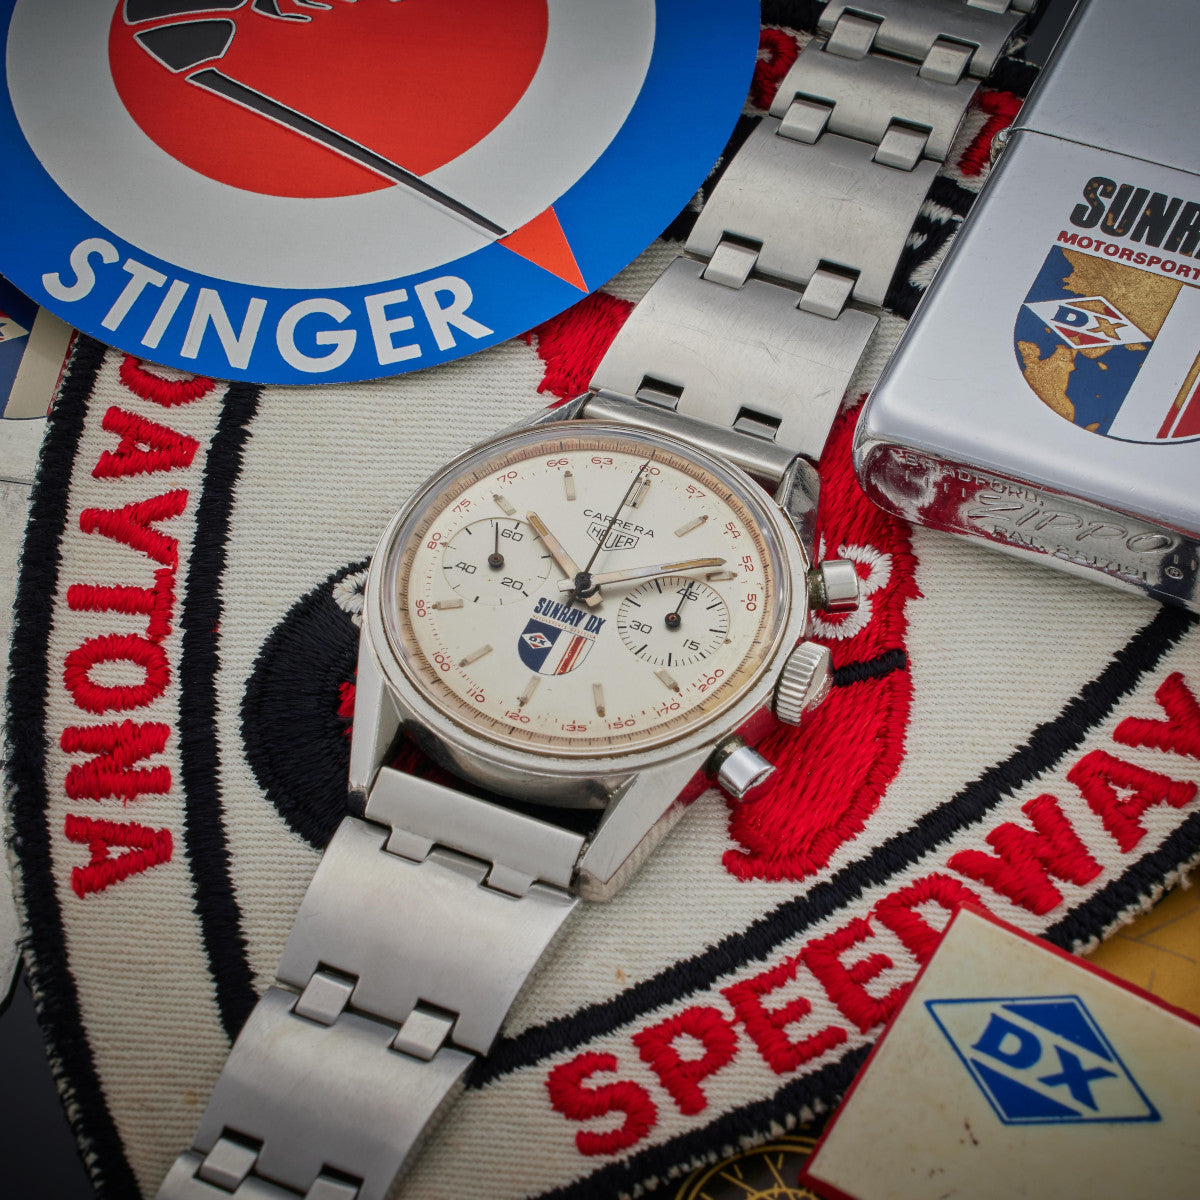 'Sunray DX Motorsports Division' logo dial, Heuer Carrera stainless steel chronograph